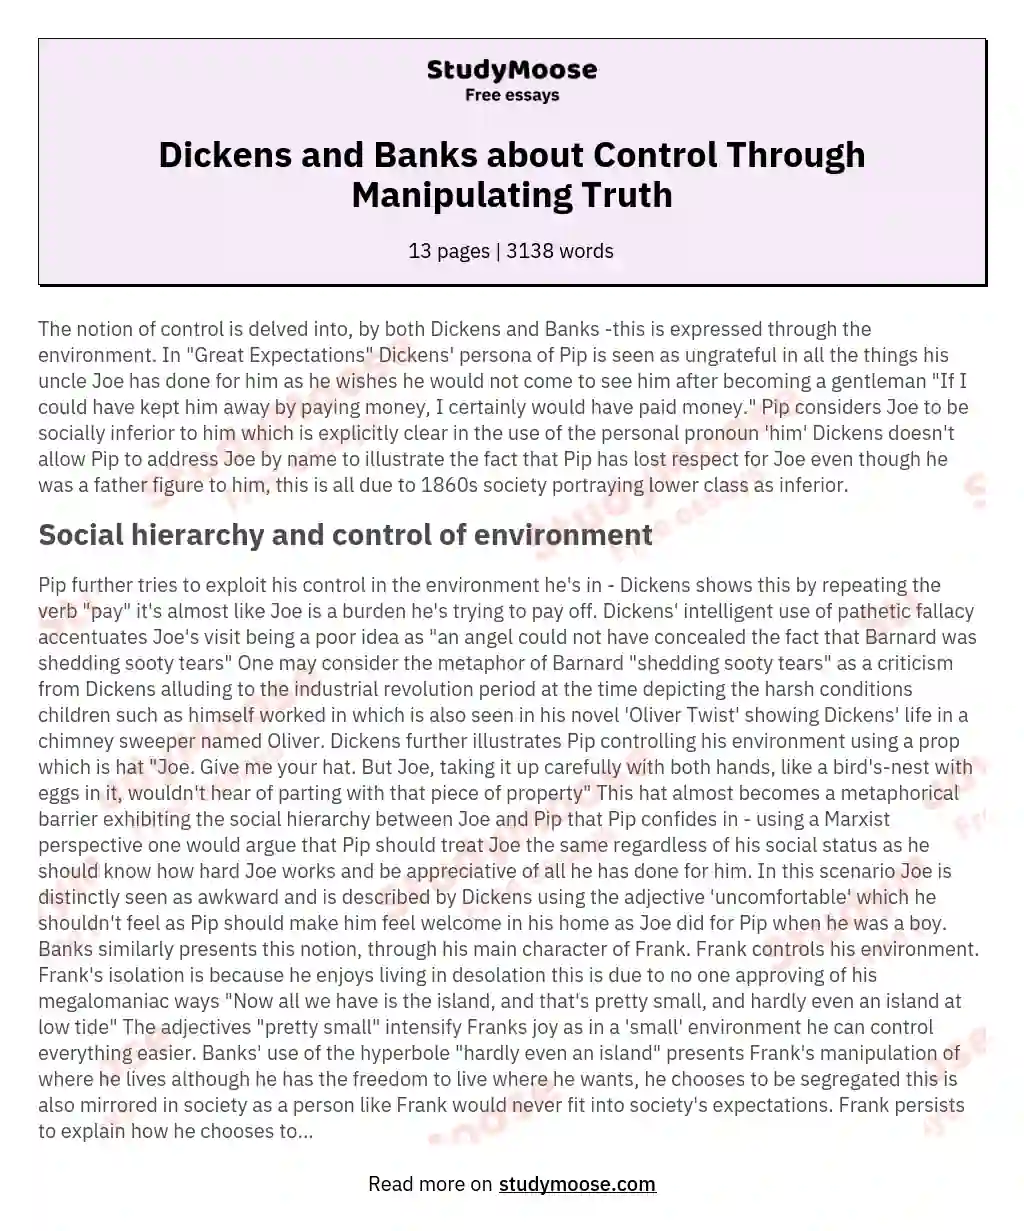 Dickens and Banks about Control Through Manipulating Truth